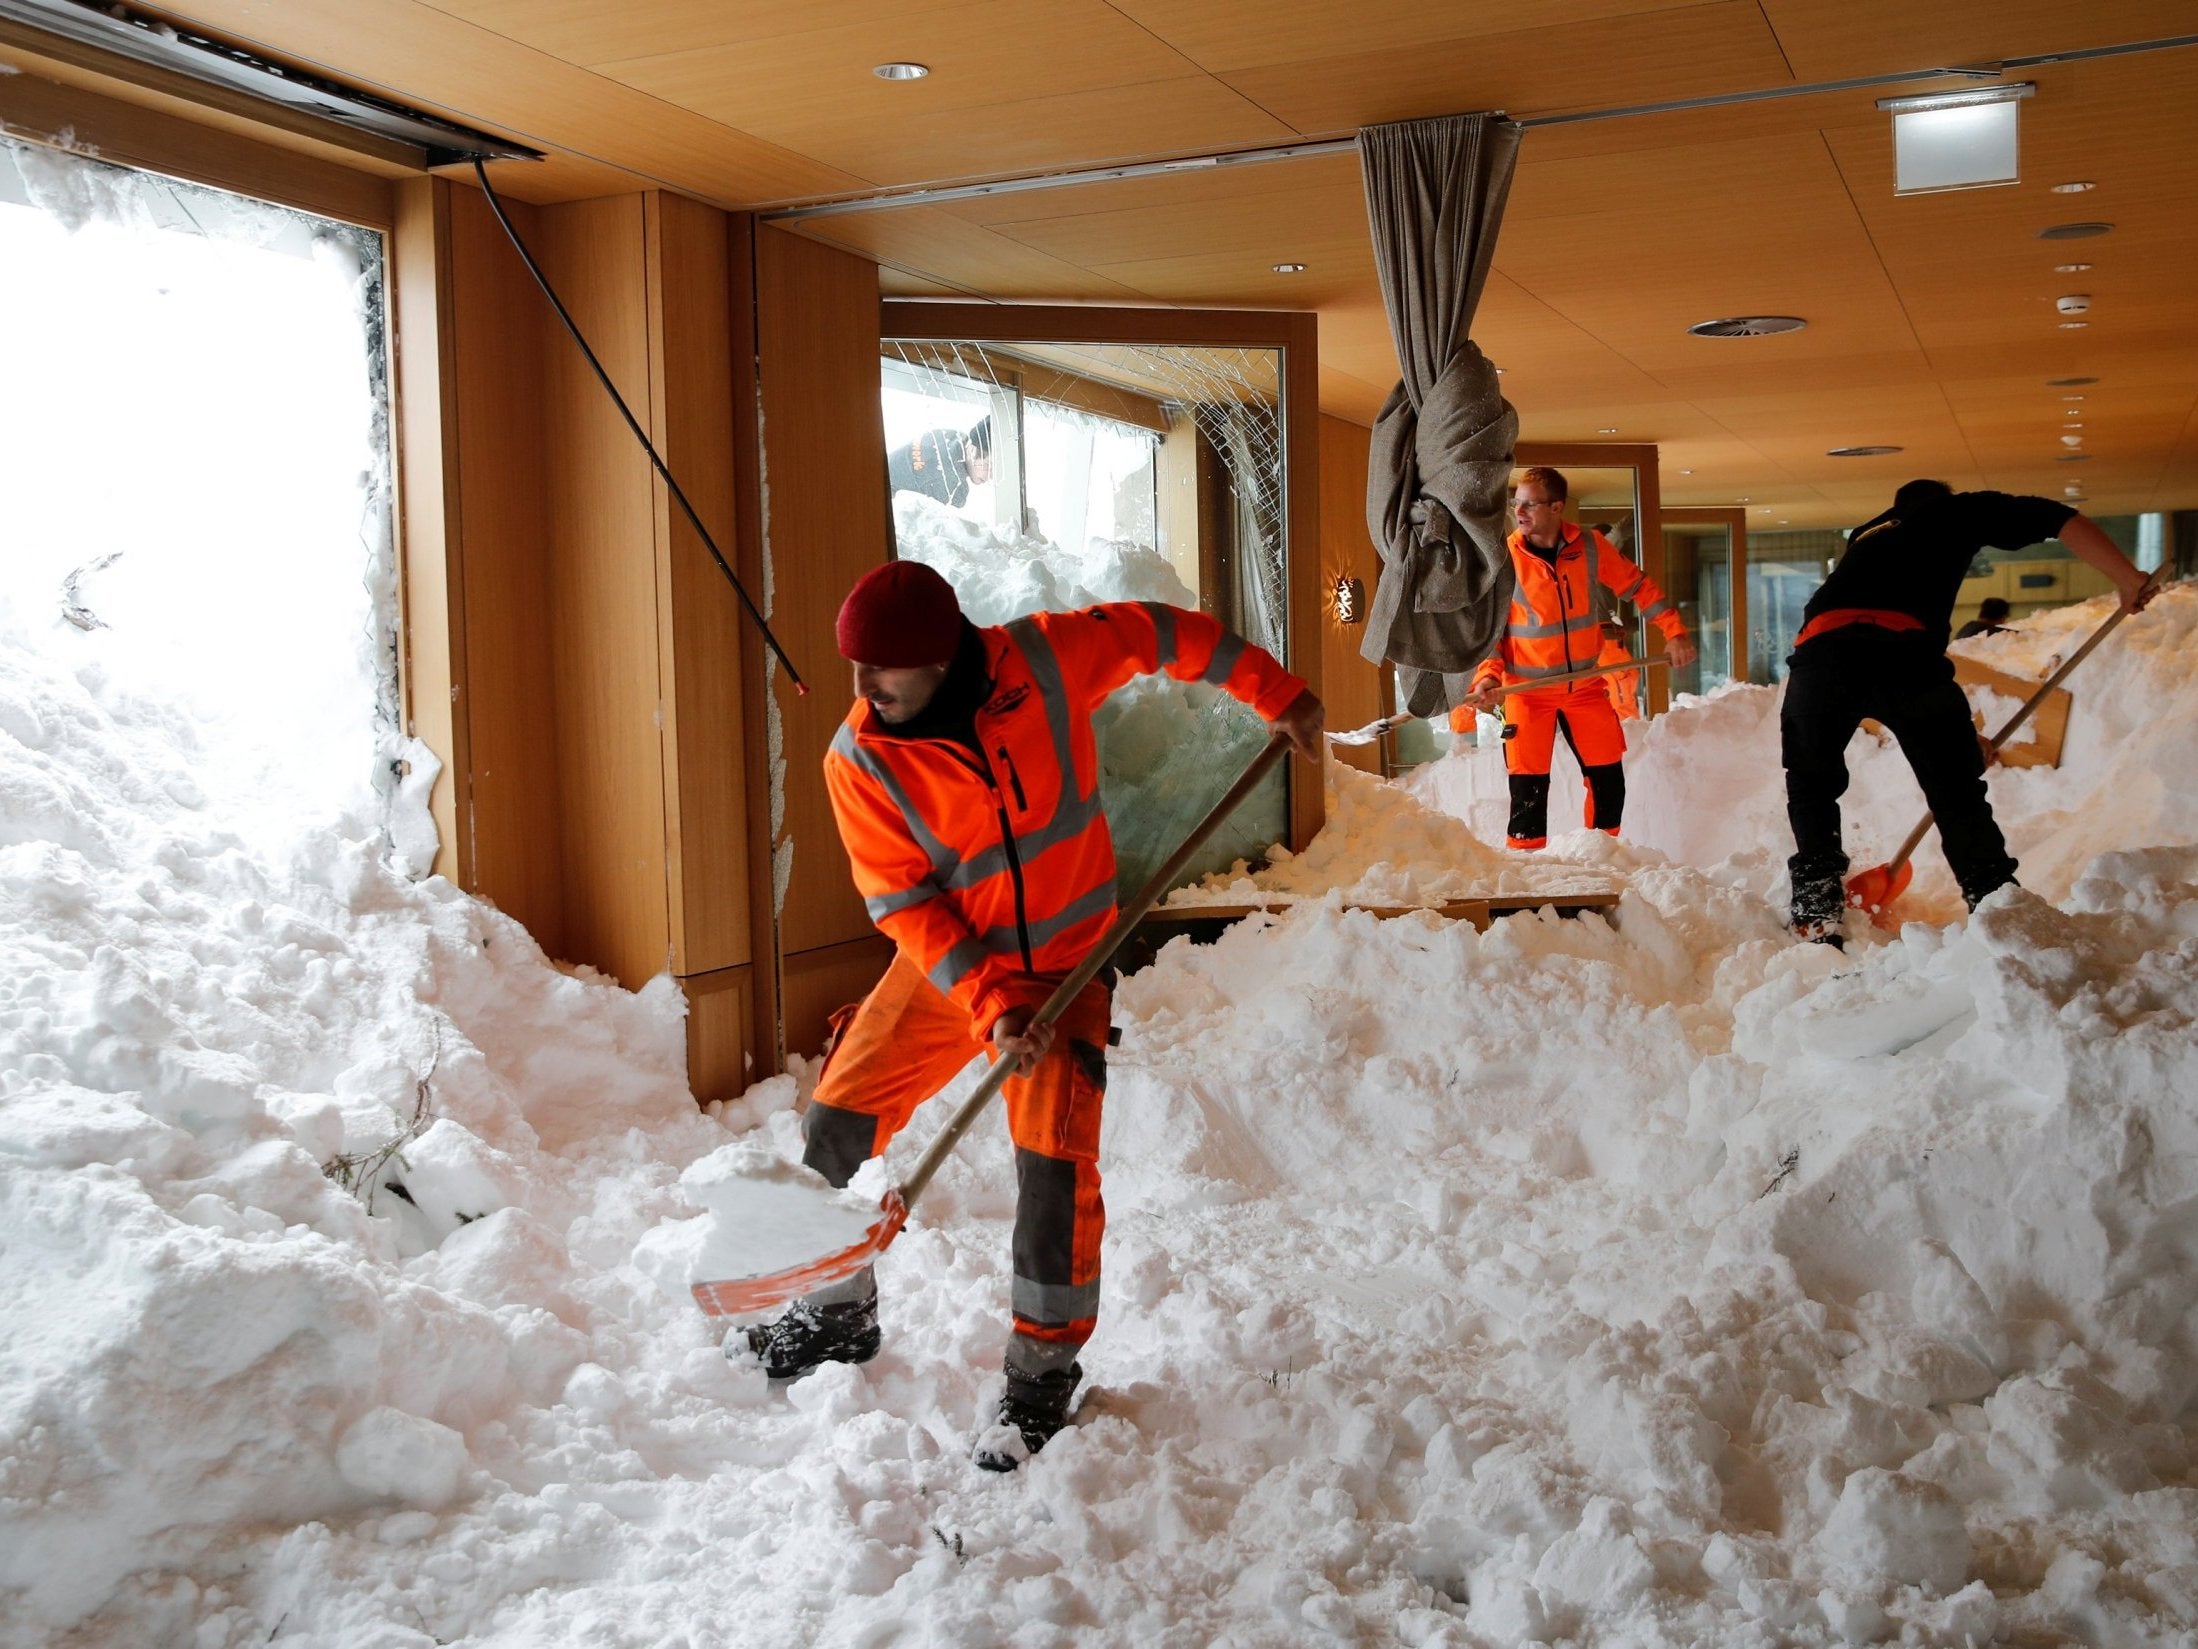 Workers shovel snow out of a hotel restaurant in the Santis-Schwaegalp mountain resort in in Switzerland